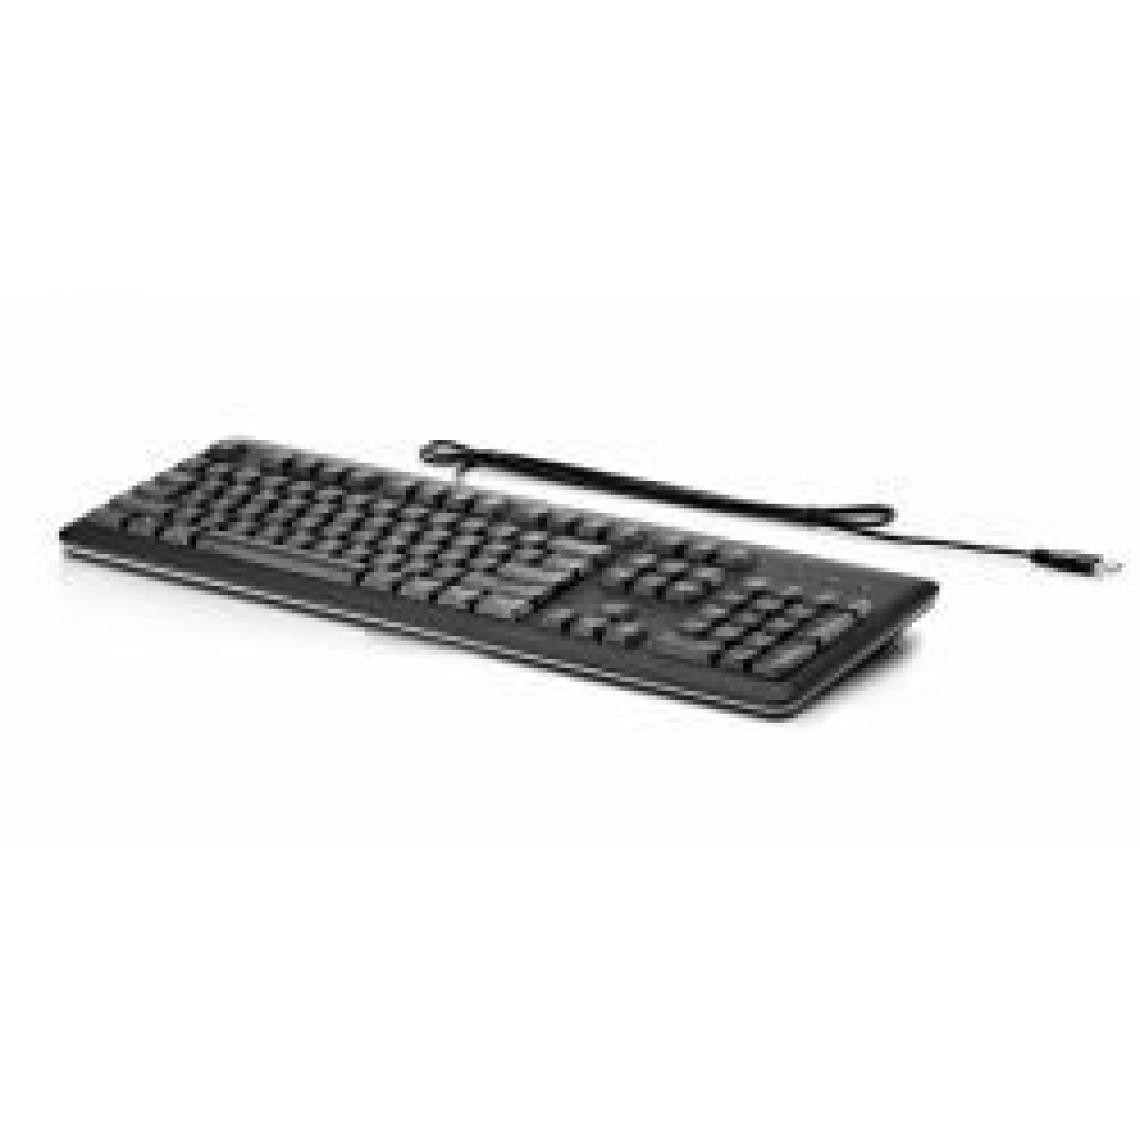 Inconnu - HP Inc. Promo USB Keyboard DK **New Retail**, QY776AT#ABY (**New Retail**) - Clavier